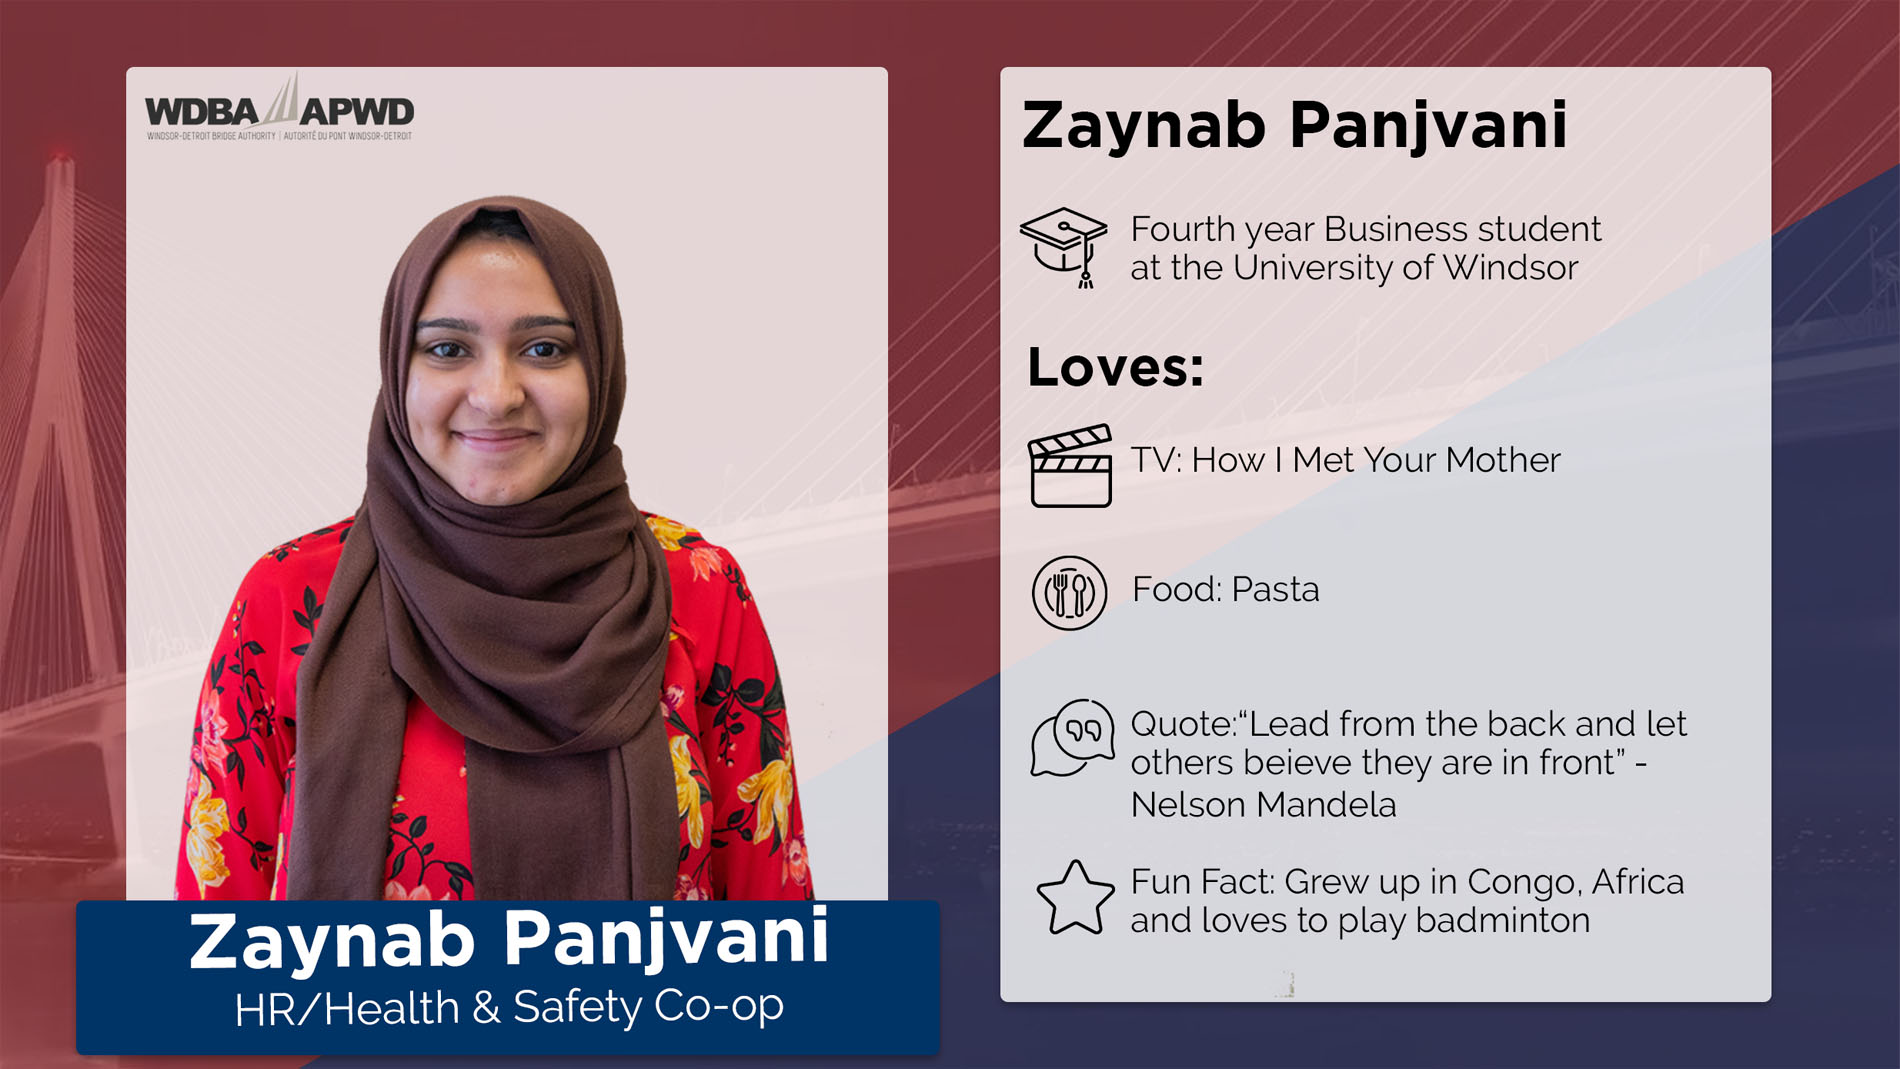 Zaynab Panjvani, HR/Health & Safety Co-op. Fourth year Business student at the Unviersity of Windsor. Loves: TV: How I Met Your Mother. Food: Pasta. Quote: "Lead from the back and let other sbelieve they are in front" - Nelson Mandela. Fun Fact: Grew up in Congo, Africa and loves to play badminton. 